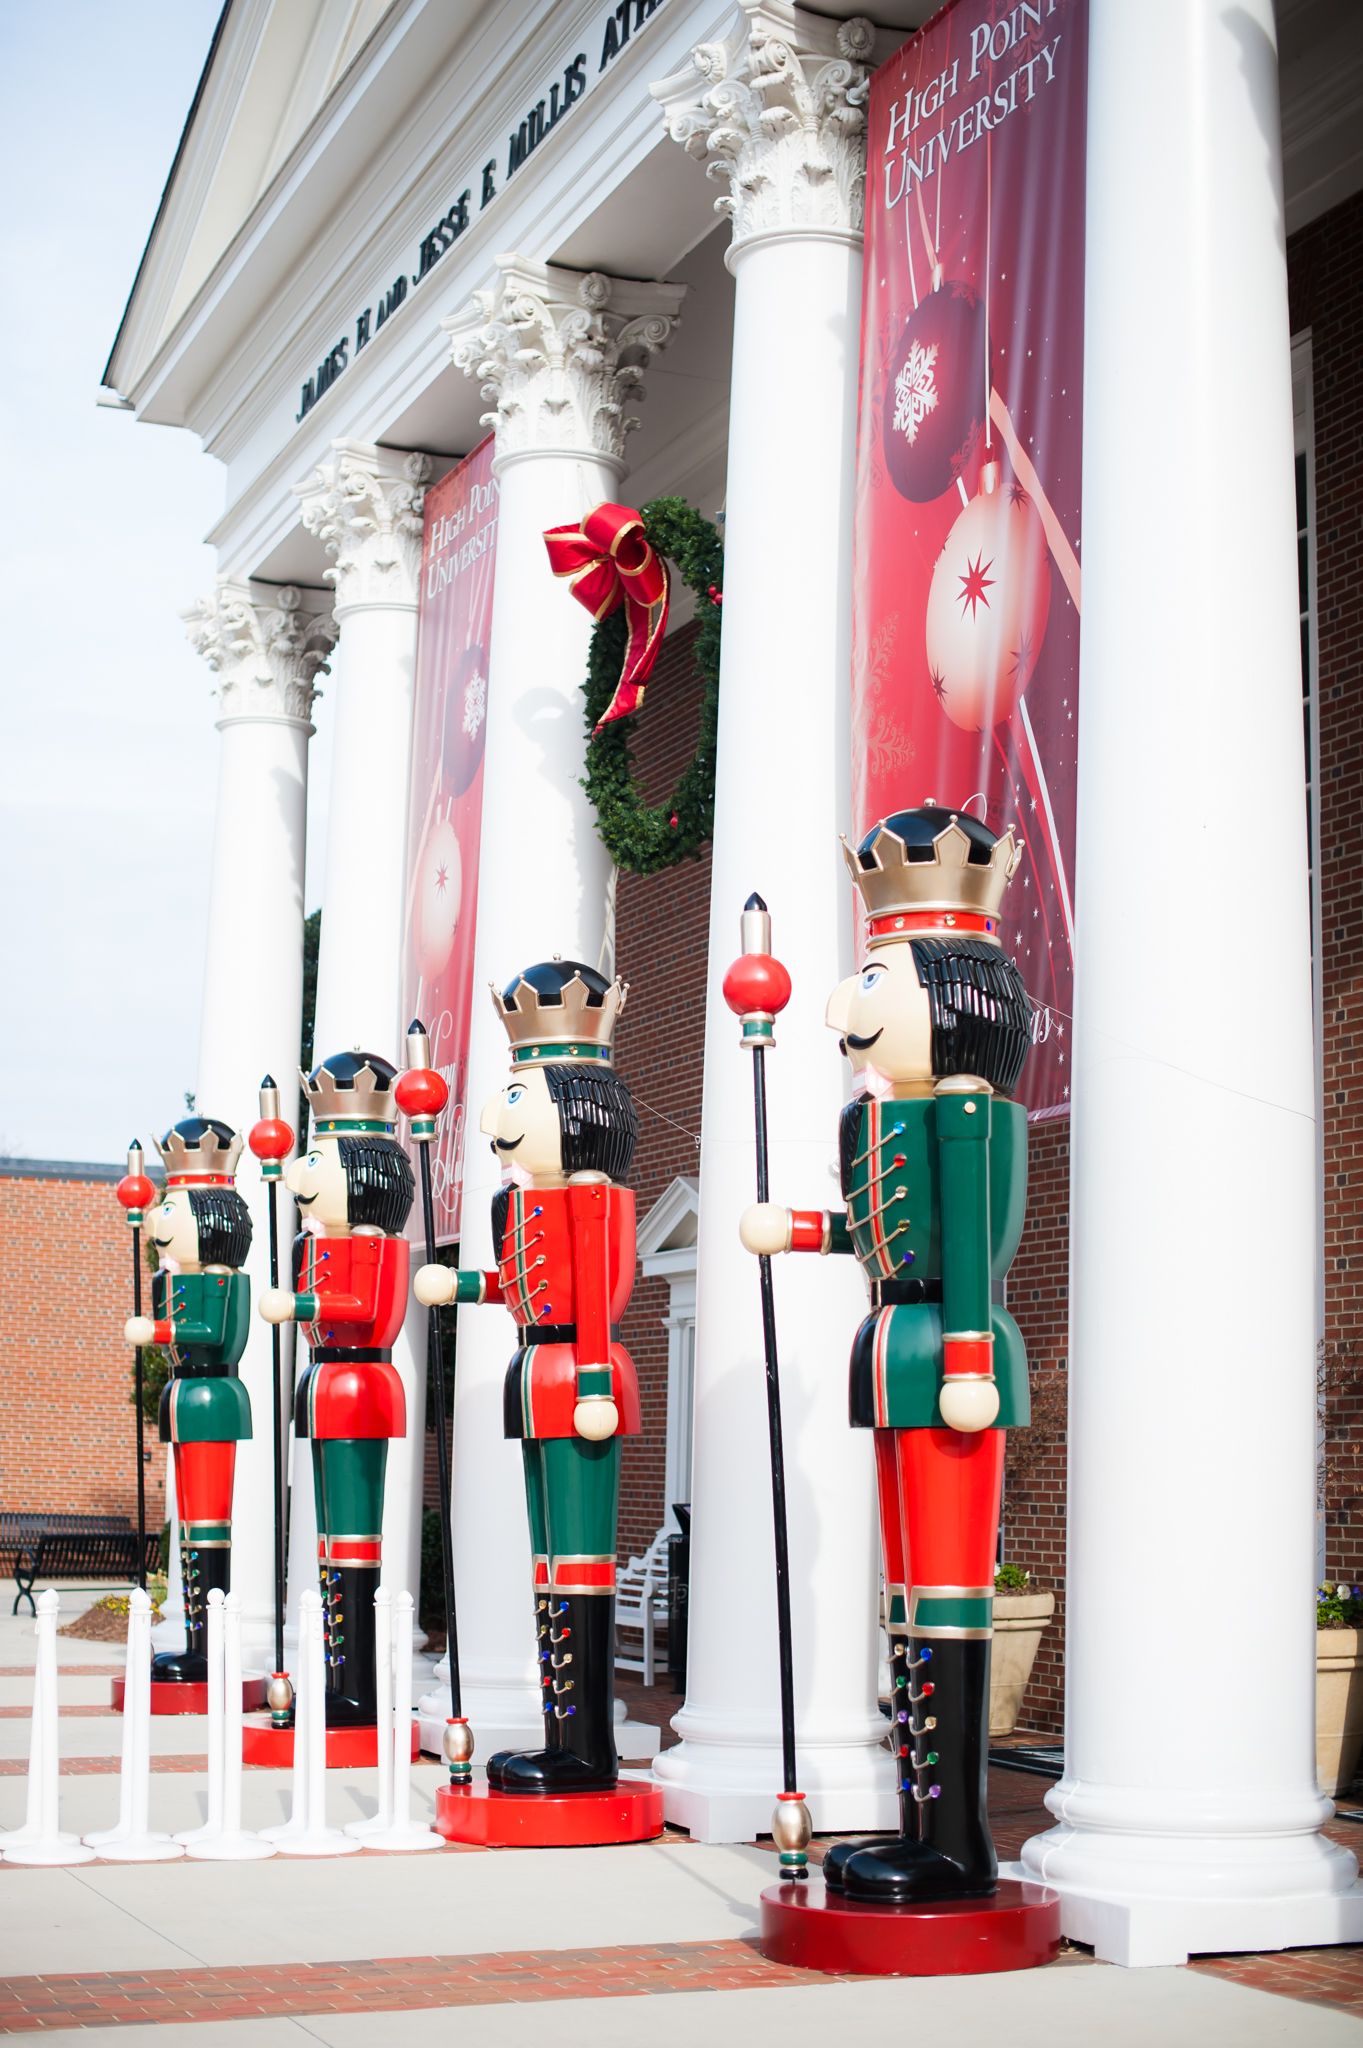 Nutcrackers standing at High Point University.